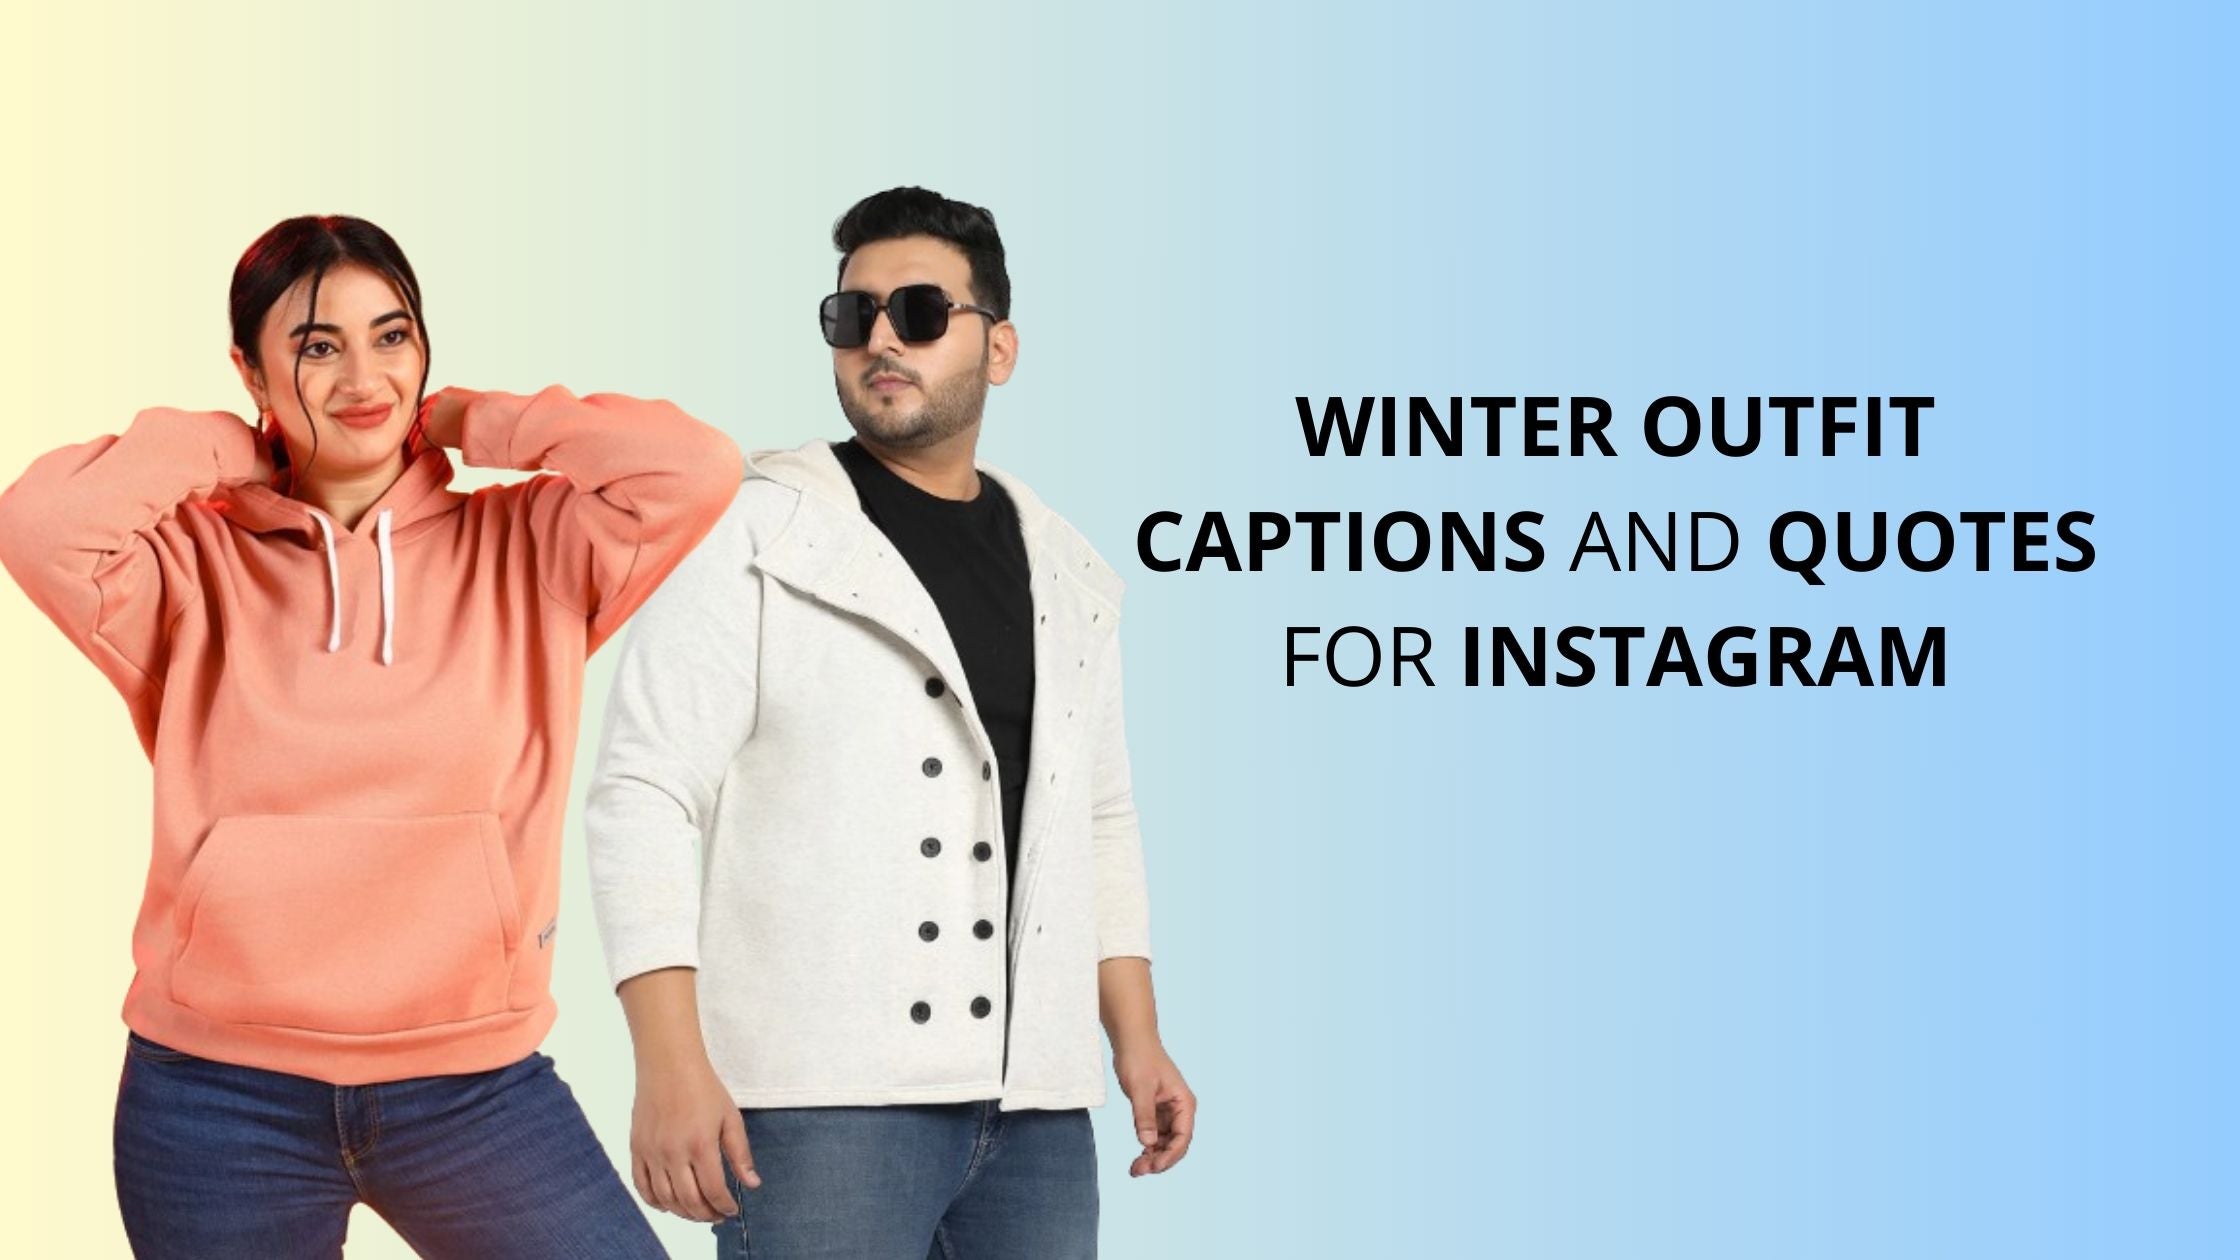 Winter Outfit Captions and Quotes for Instagram